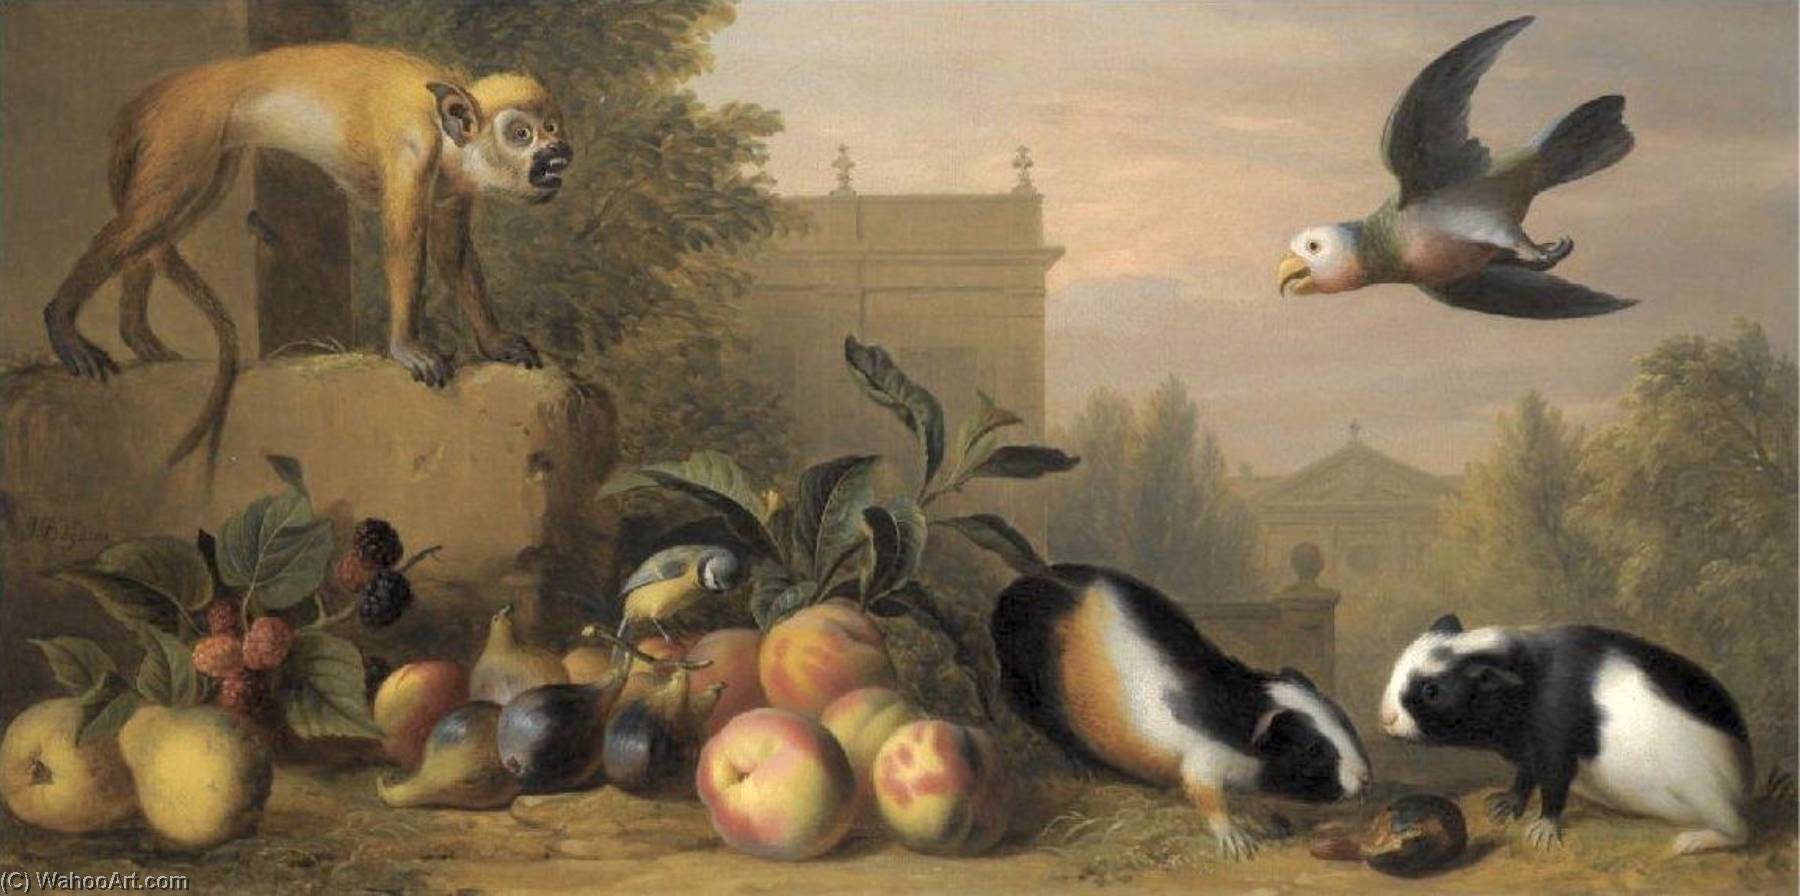 WikiOO.org - Enciklopedija dailės - Tapyba, meno kuriniai Jakob Bogdani - Capuchin squirrel monkey, two guinea pigs, a blue tit and an Amazon St. Vincent parrot with Peaches, Figs and Pears in a landscape